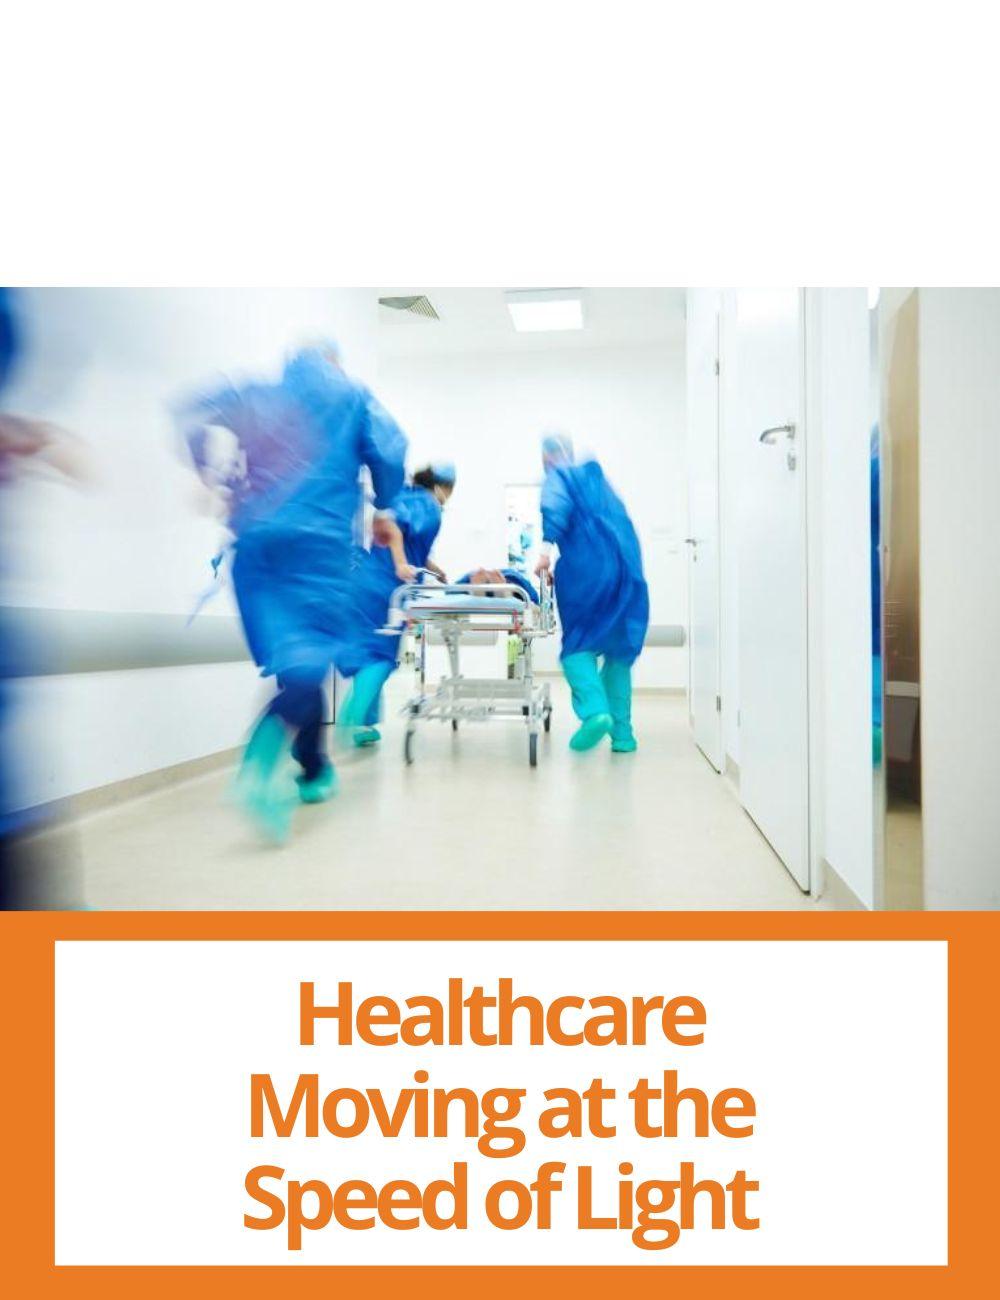 Link to related stories. Image: Doctors running for surgery. Story headline: OASI Report: Healthcare Moving at the Speed of Light